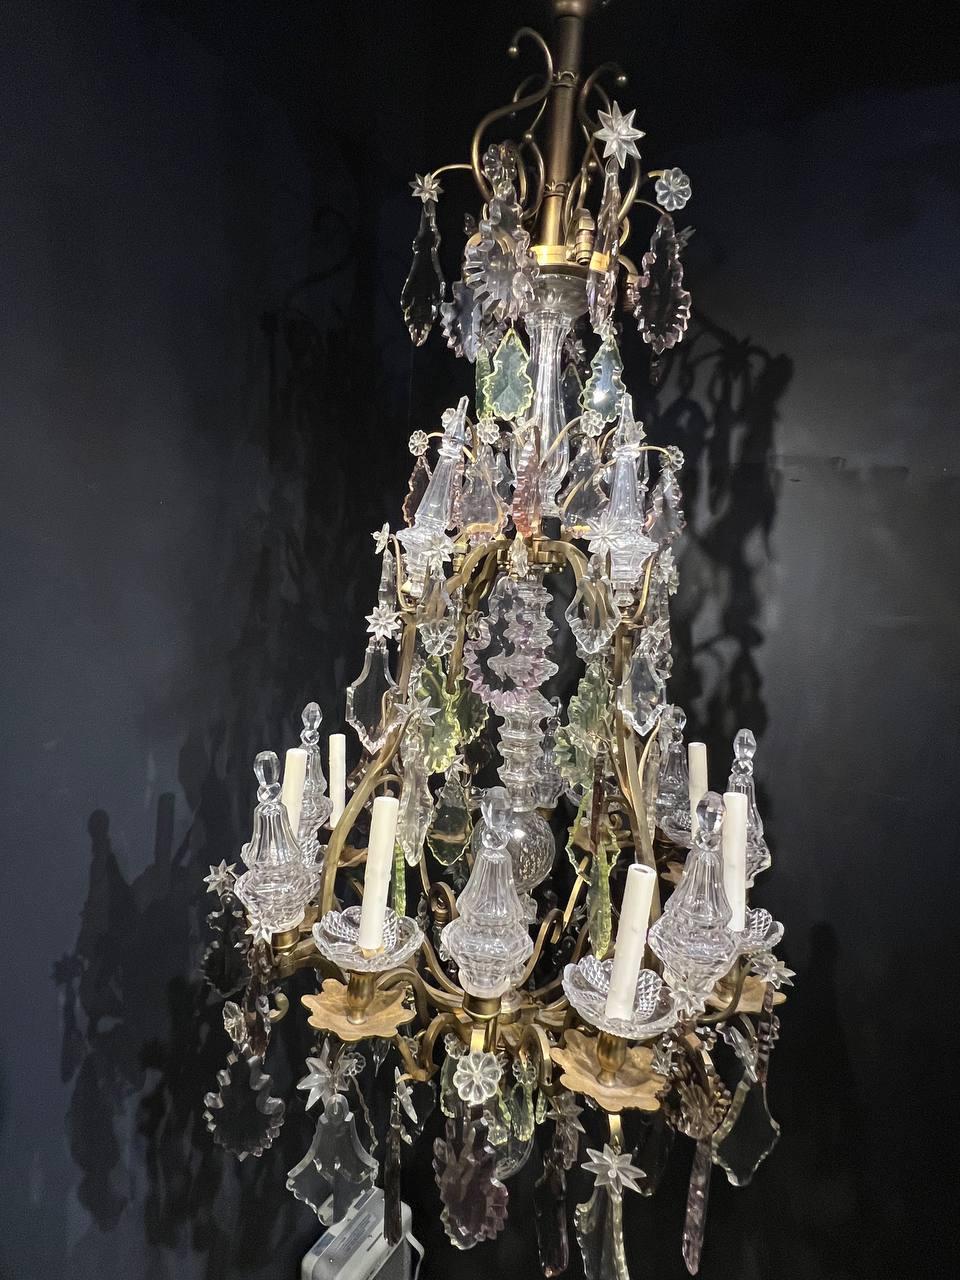 French Provincial 1920's Large Bronze and Crystal Hangings Chandelier For Sale